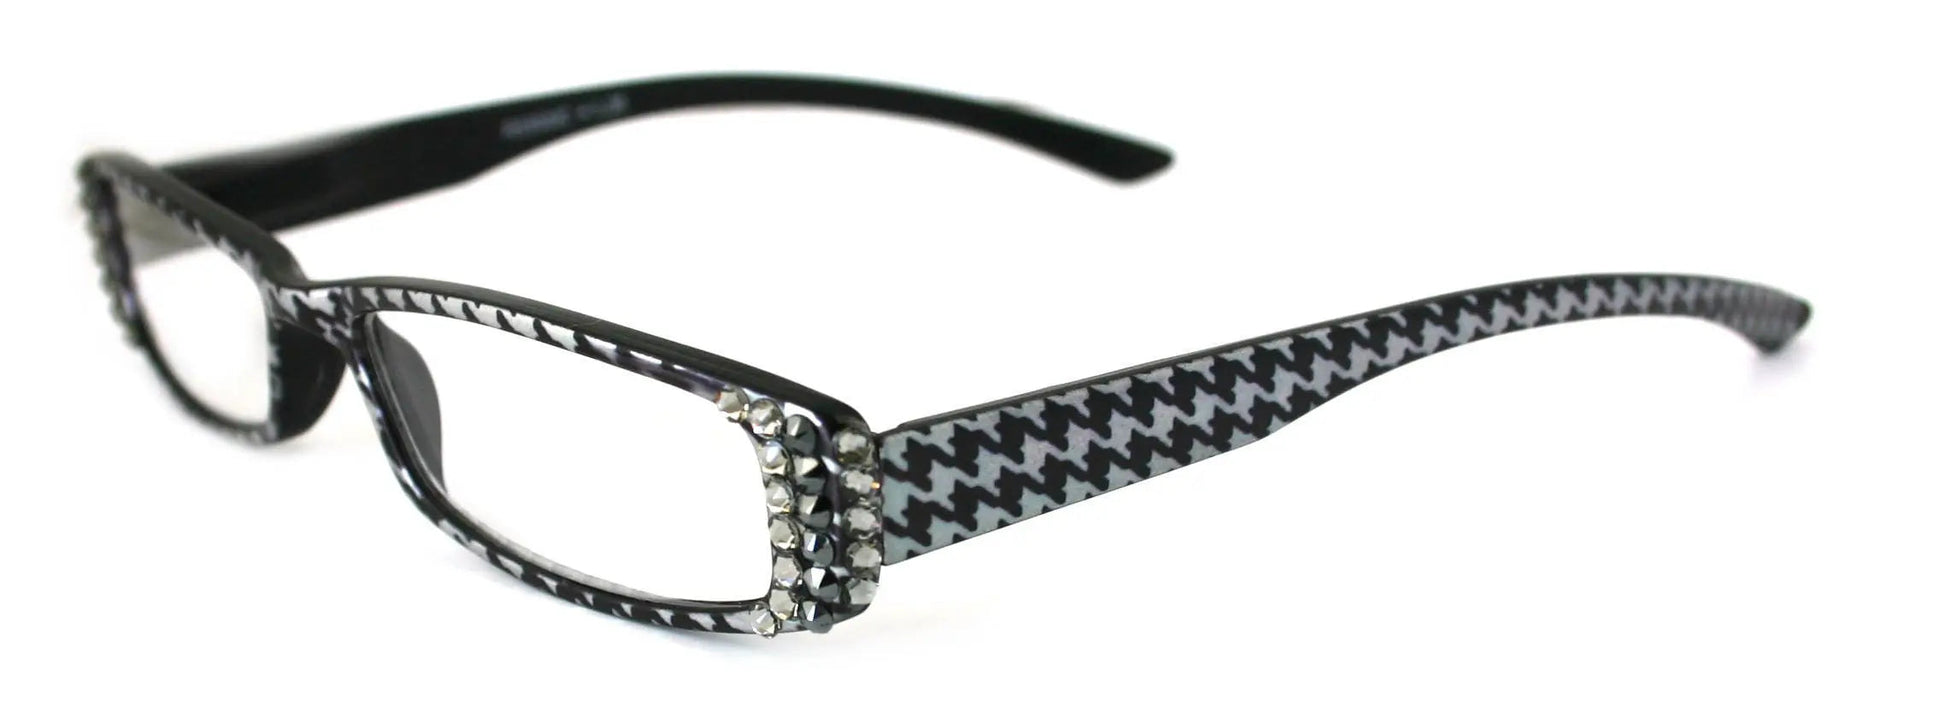 The Swedish, (Bling) Reading Glasses w (Hematite, Black Diamond) Genuine European Crystals, Hound Tooth Narrow Lowe nose NY Fifth Avenue 